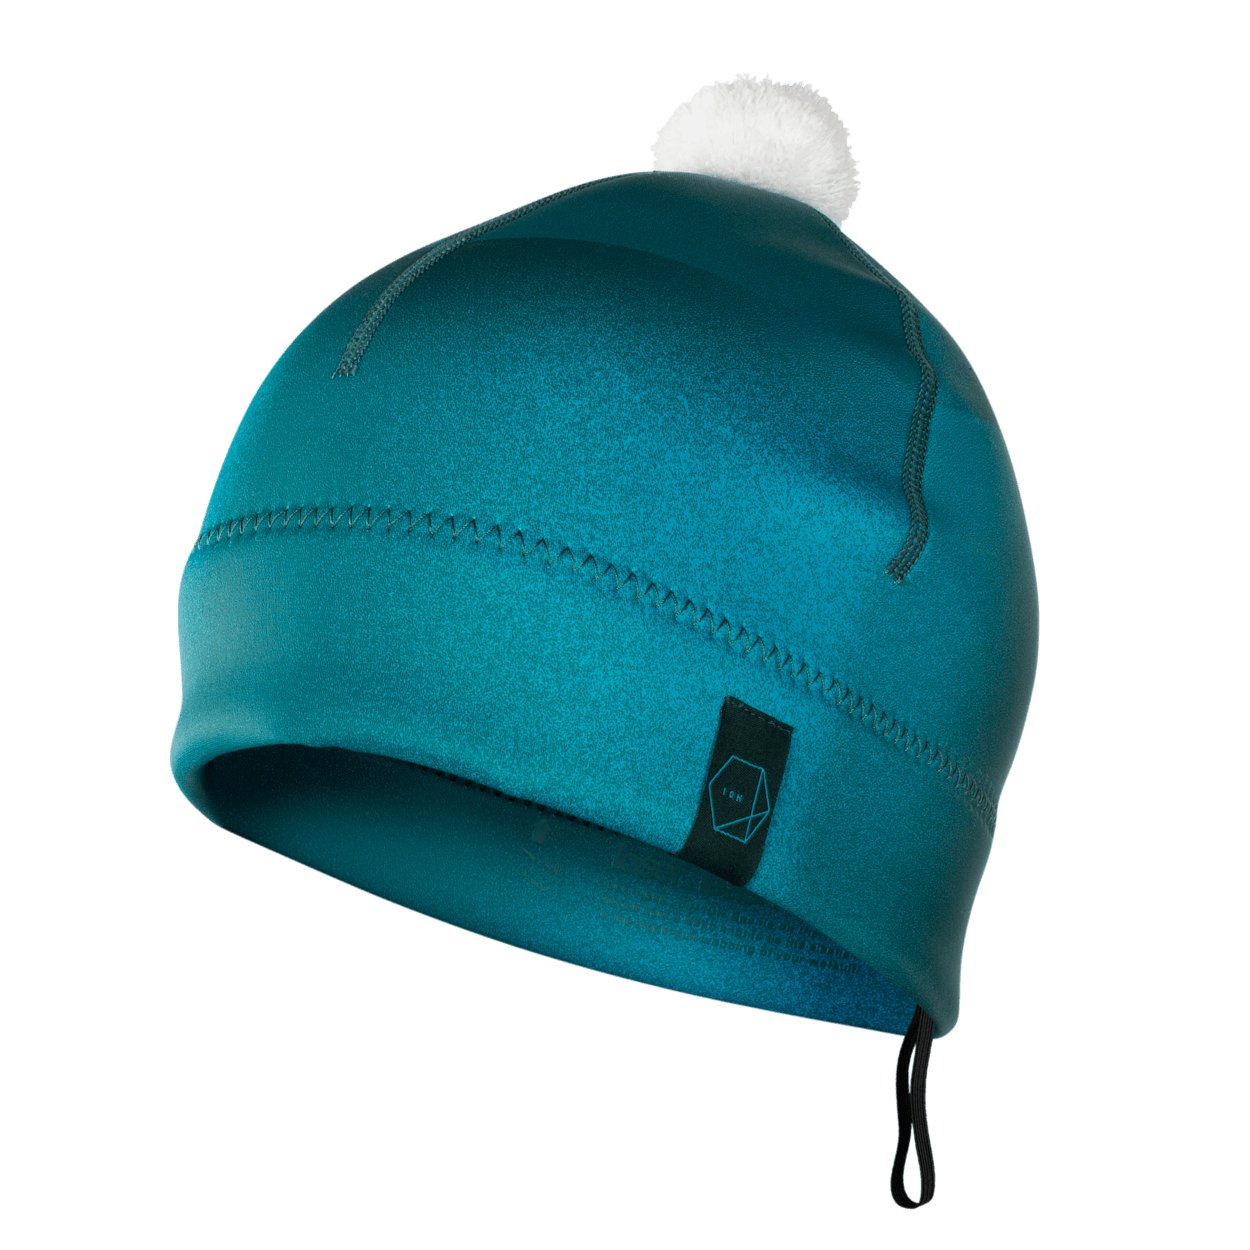 ION Neo Bommel Beanie 2022 - Worthing Watersports - 9008415831913 - Neo Accessories - ION Water